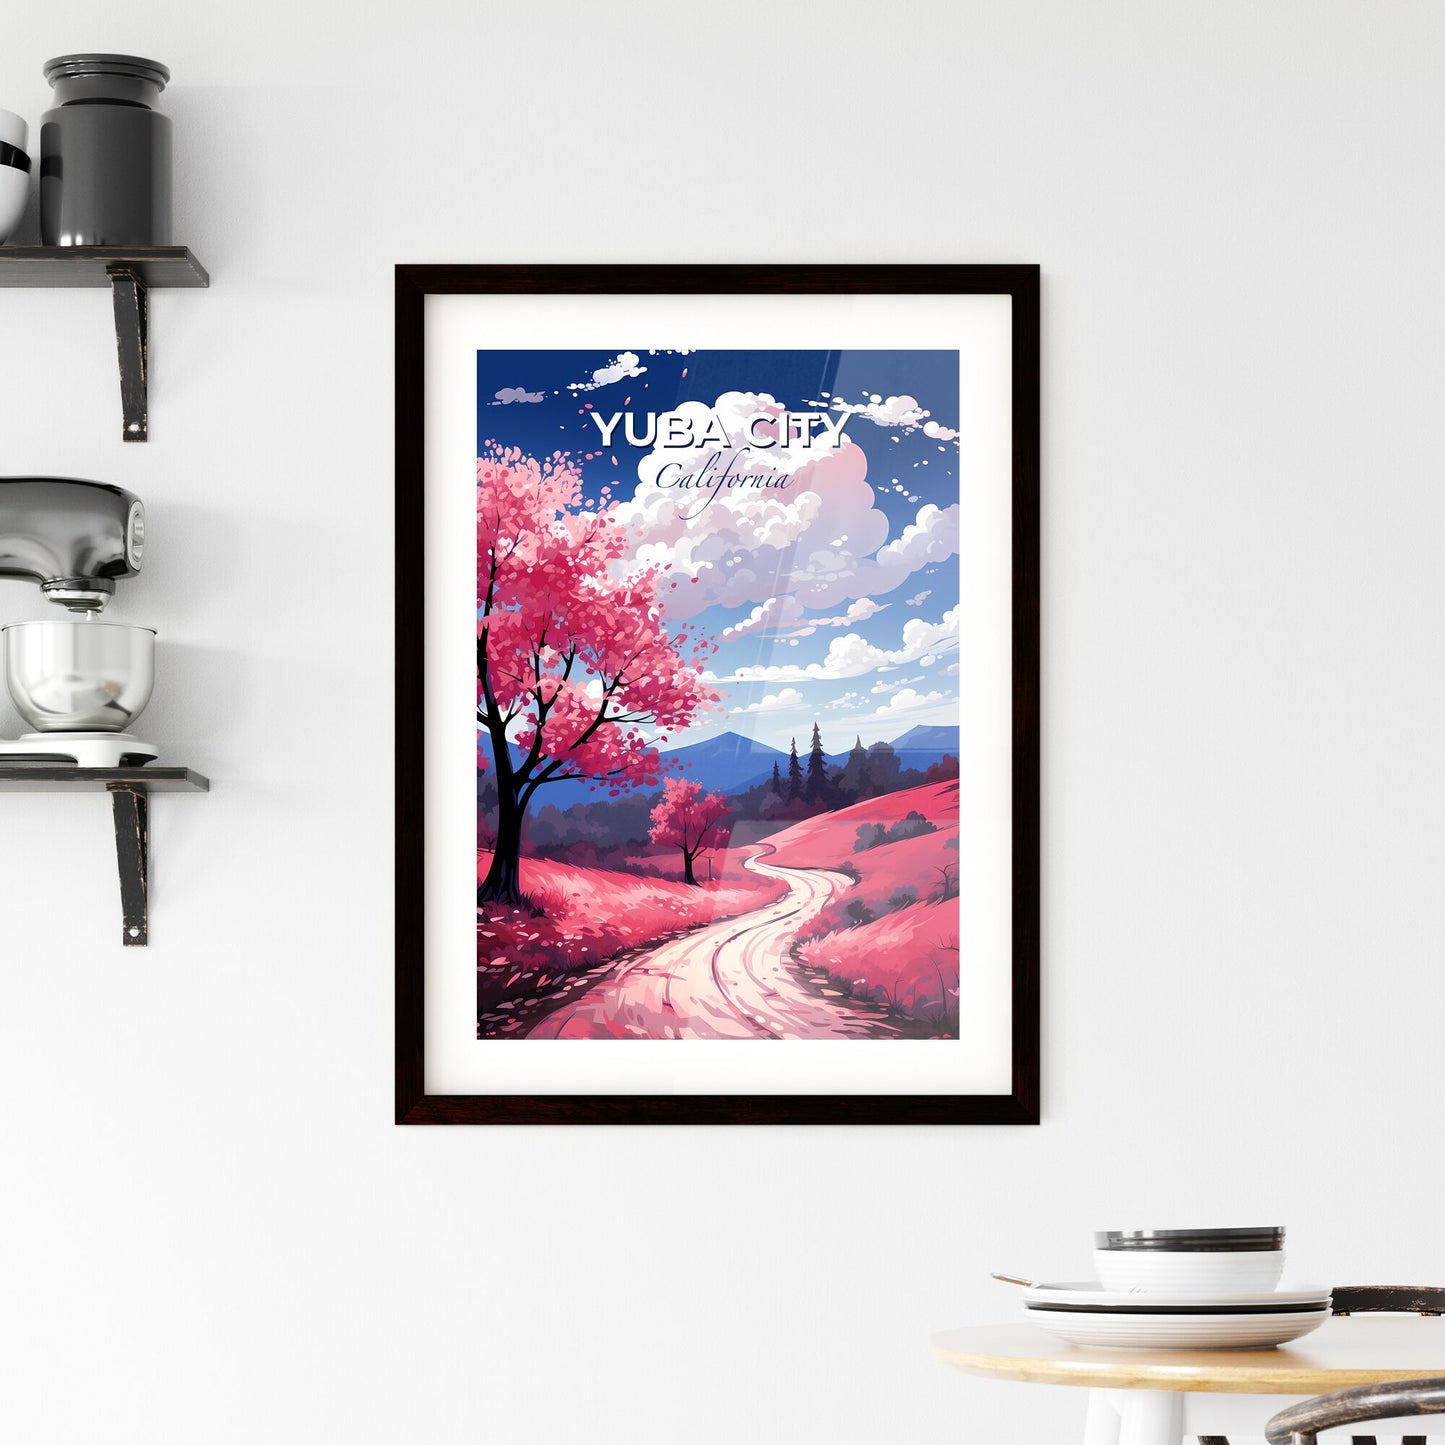 Yuba City, California, A Poster of a road through a pink field Default Title